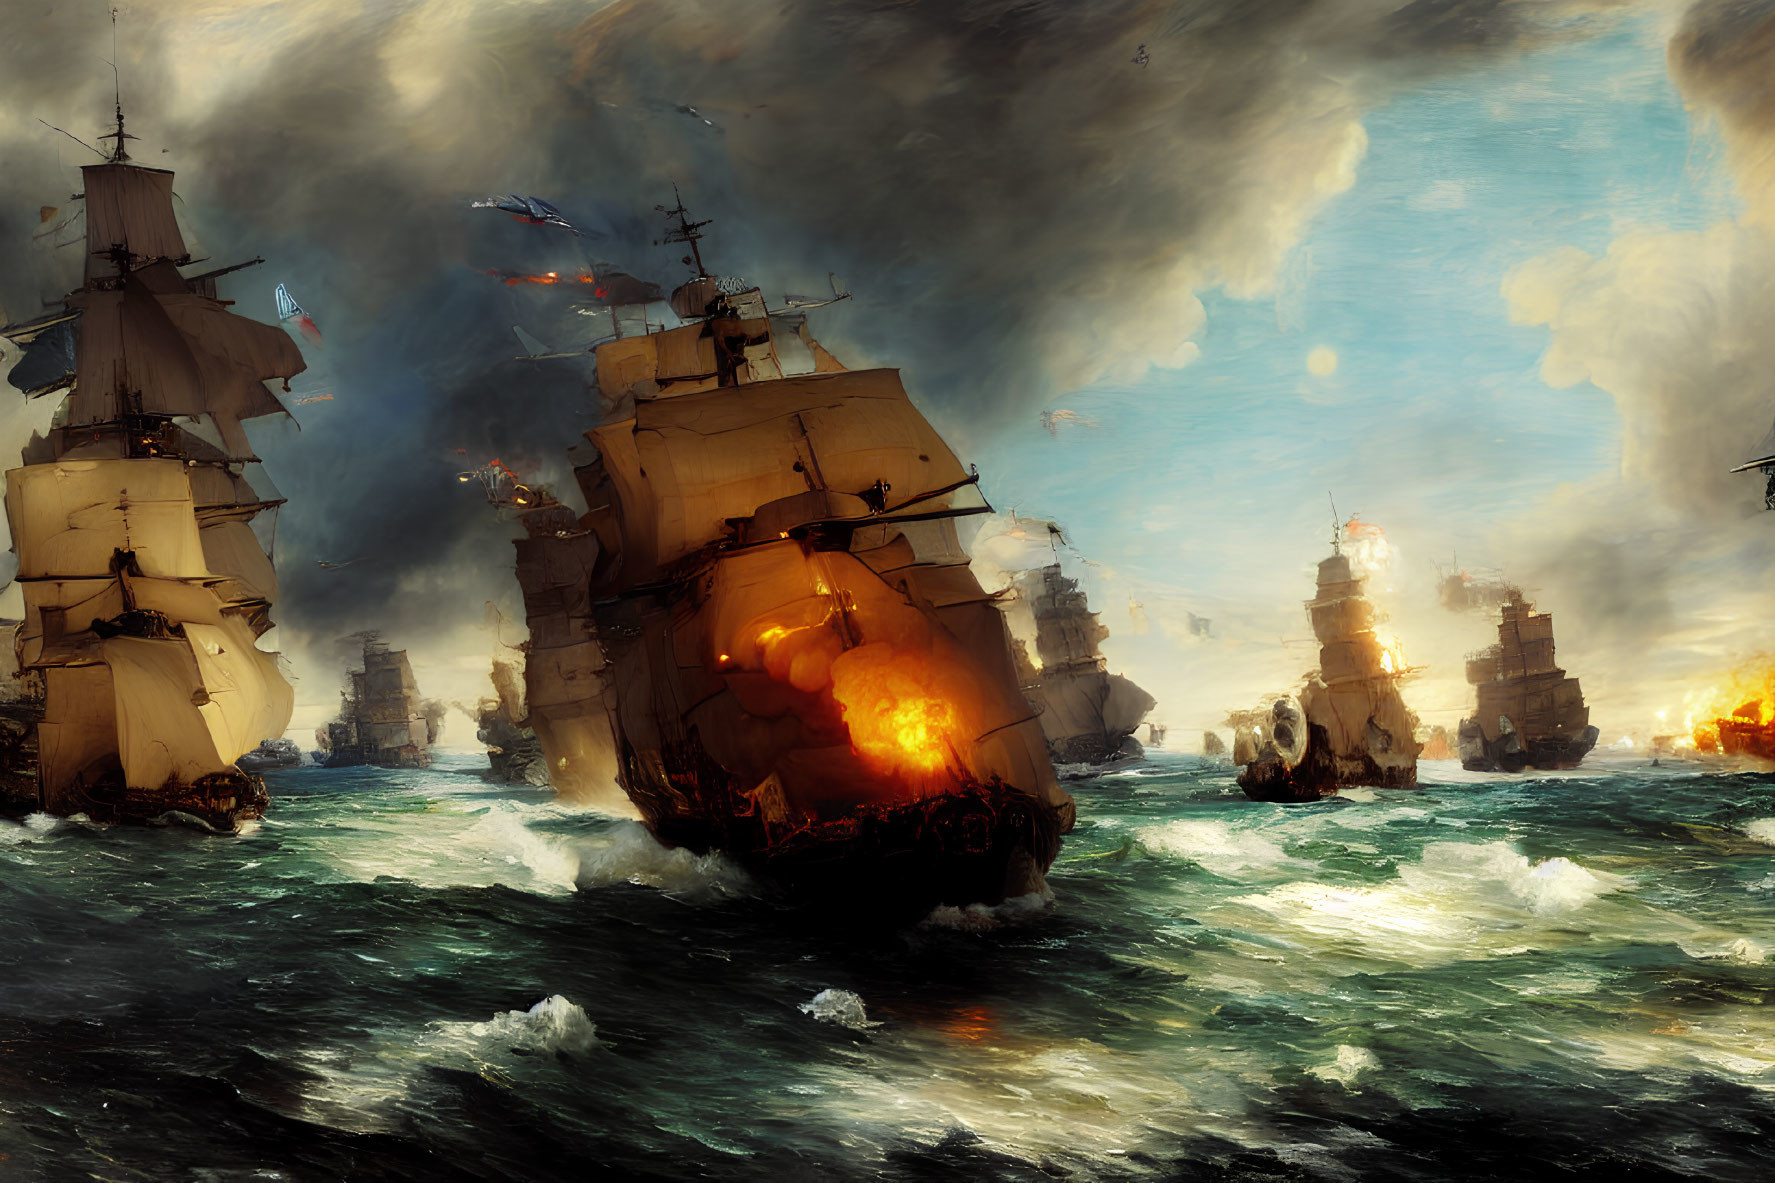 Dramatic naval battle scene with tall ships and cannon warfare